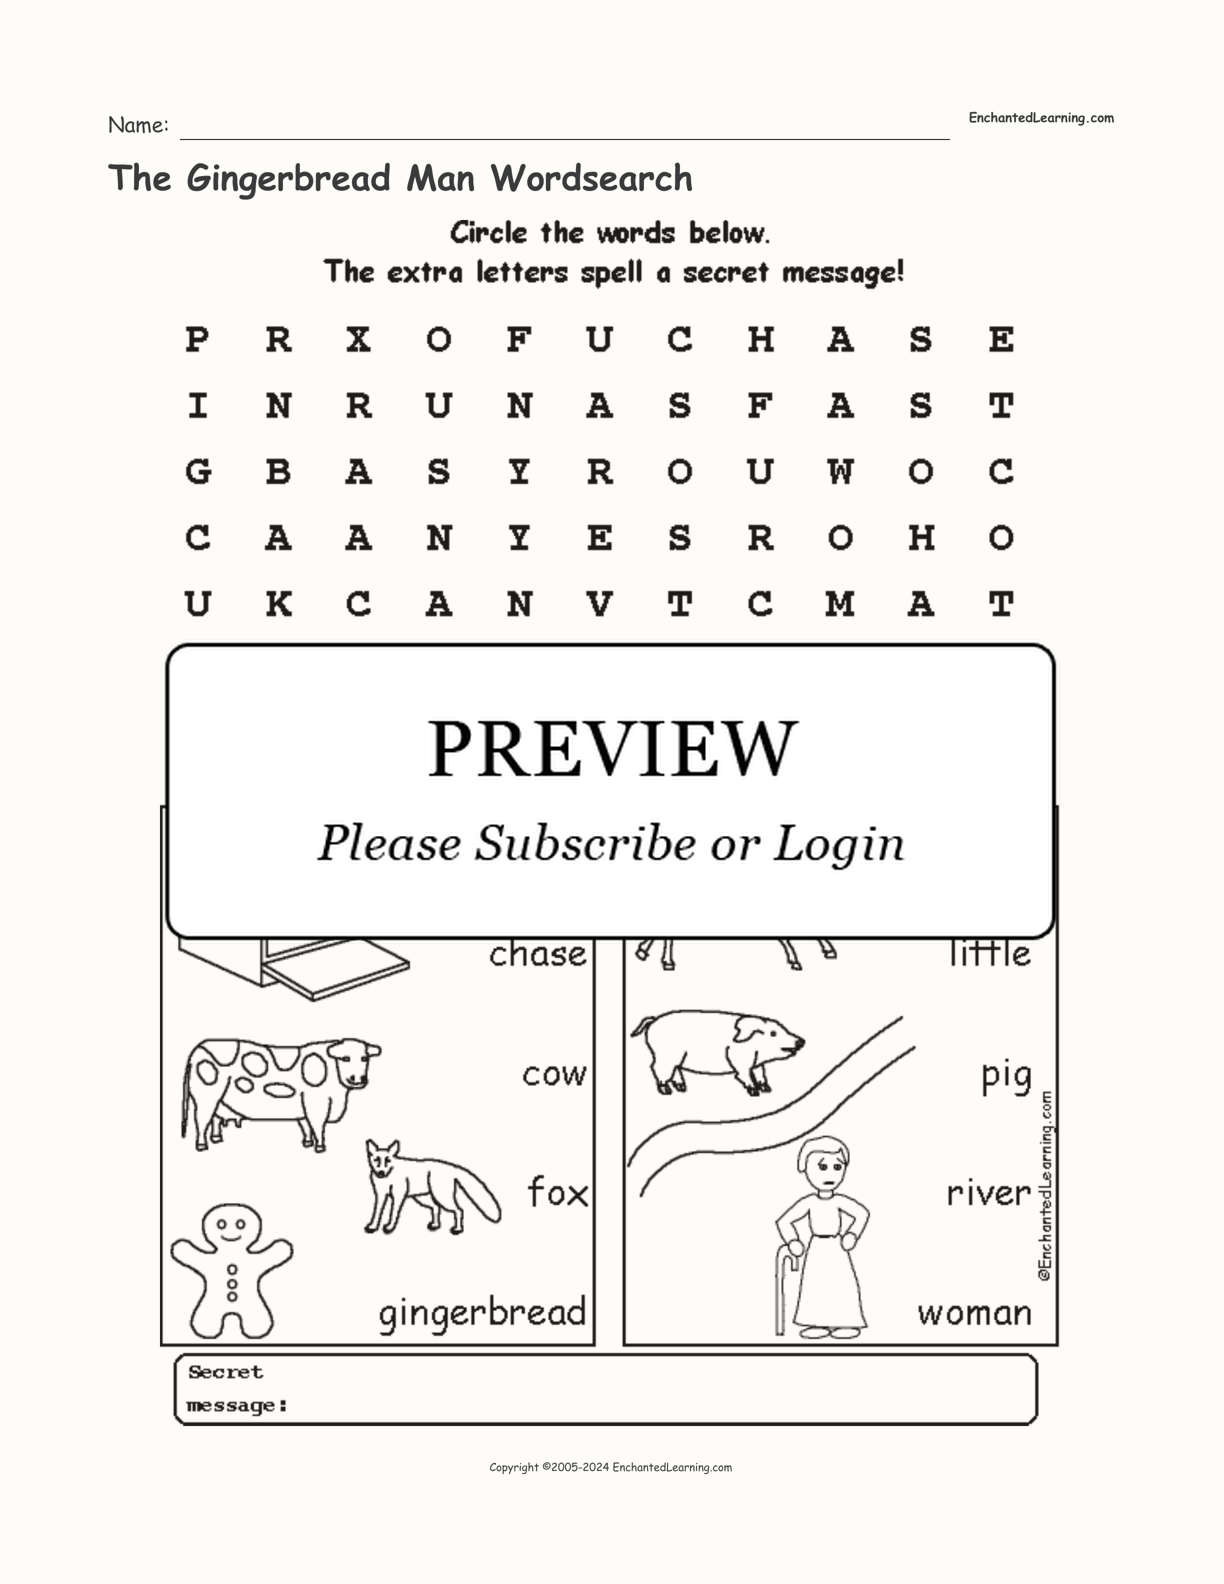 The Gingerbread Man Wordsearch interactive worksheet page 1